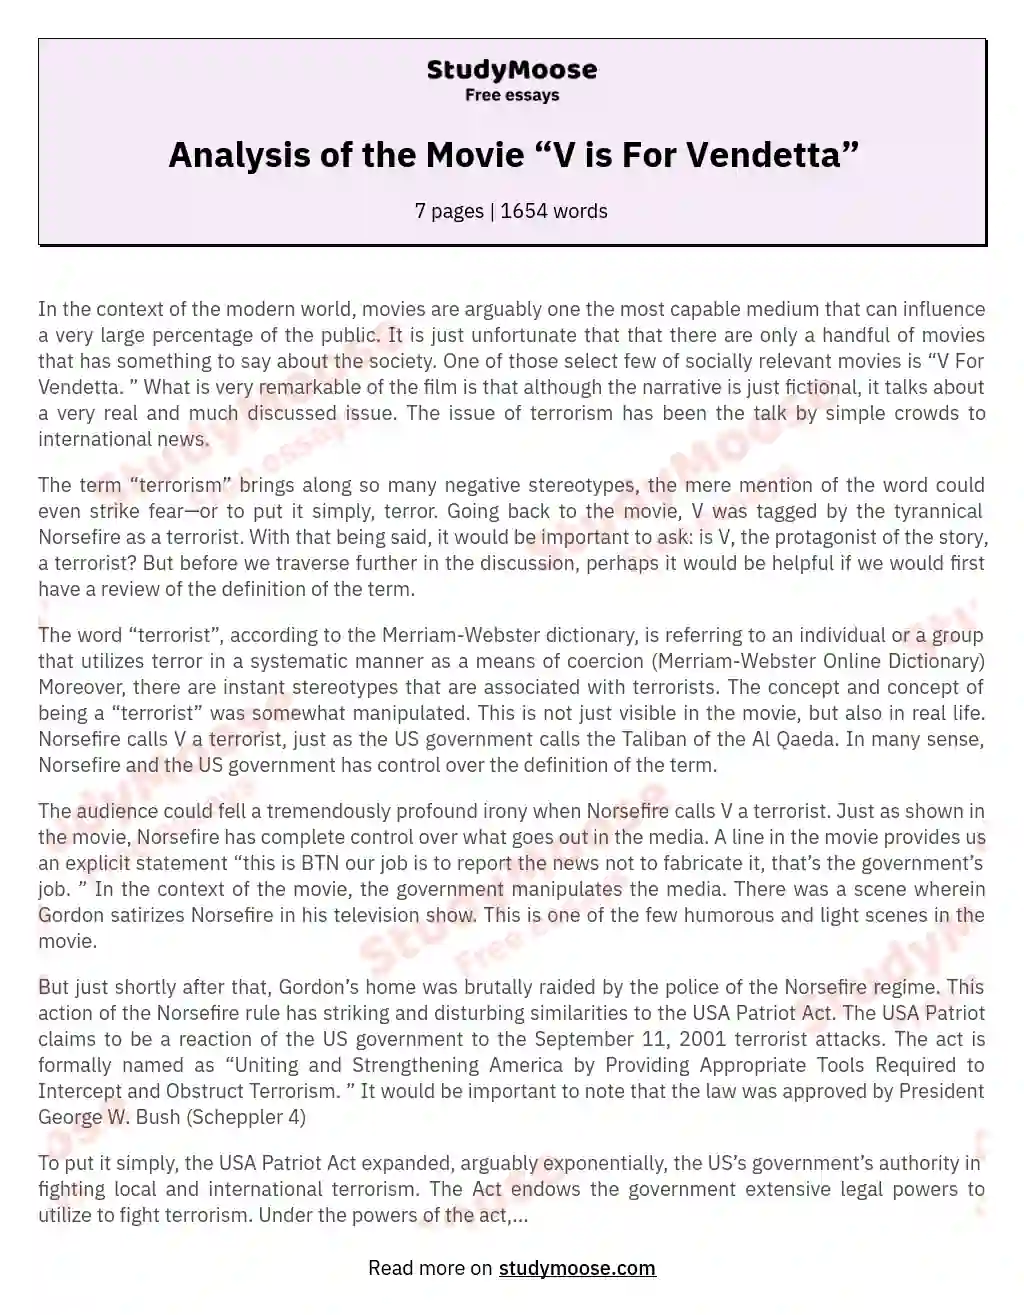 Analysis of the Movie “V is For Vendetta”